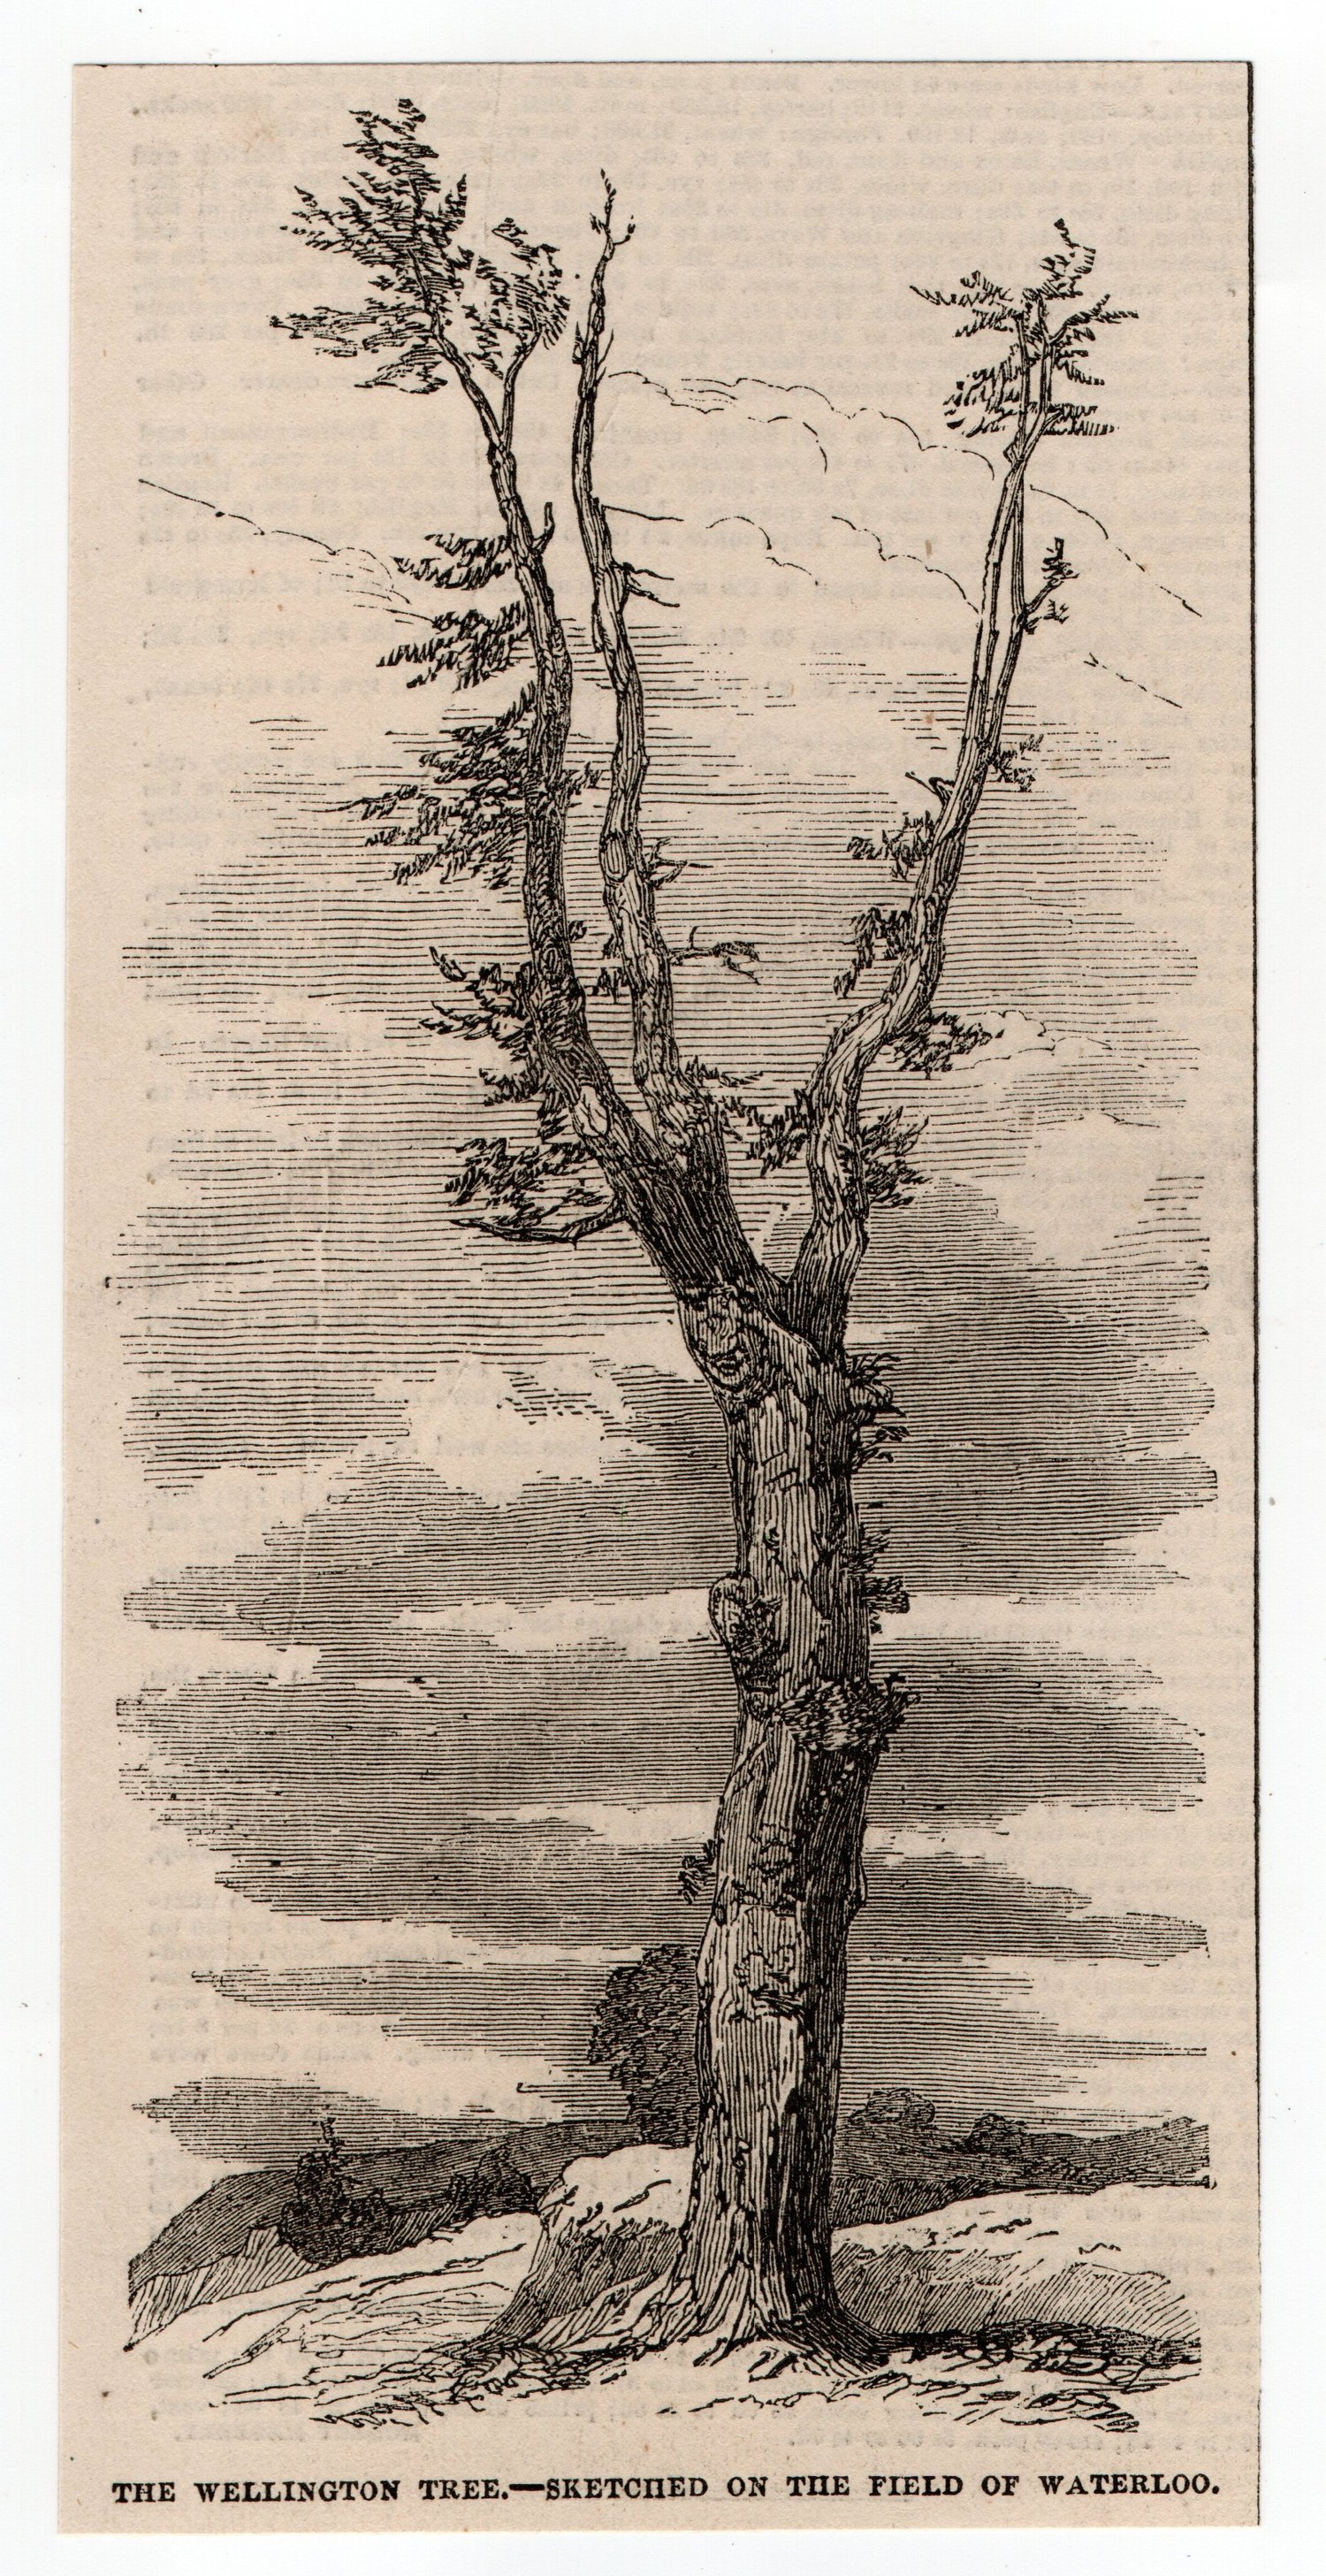 Image of Anna Atkins: the Wellington tree on the field of Waterloo ca. 1852